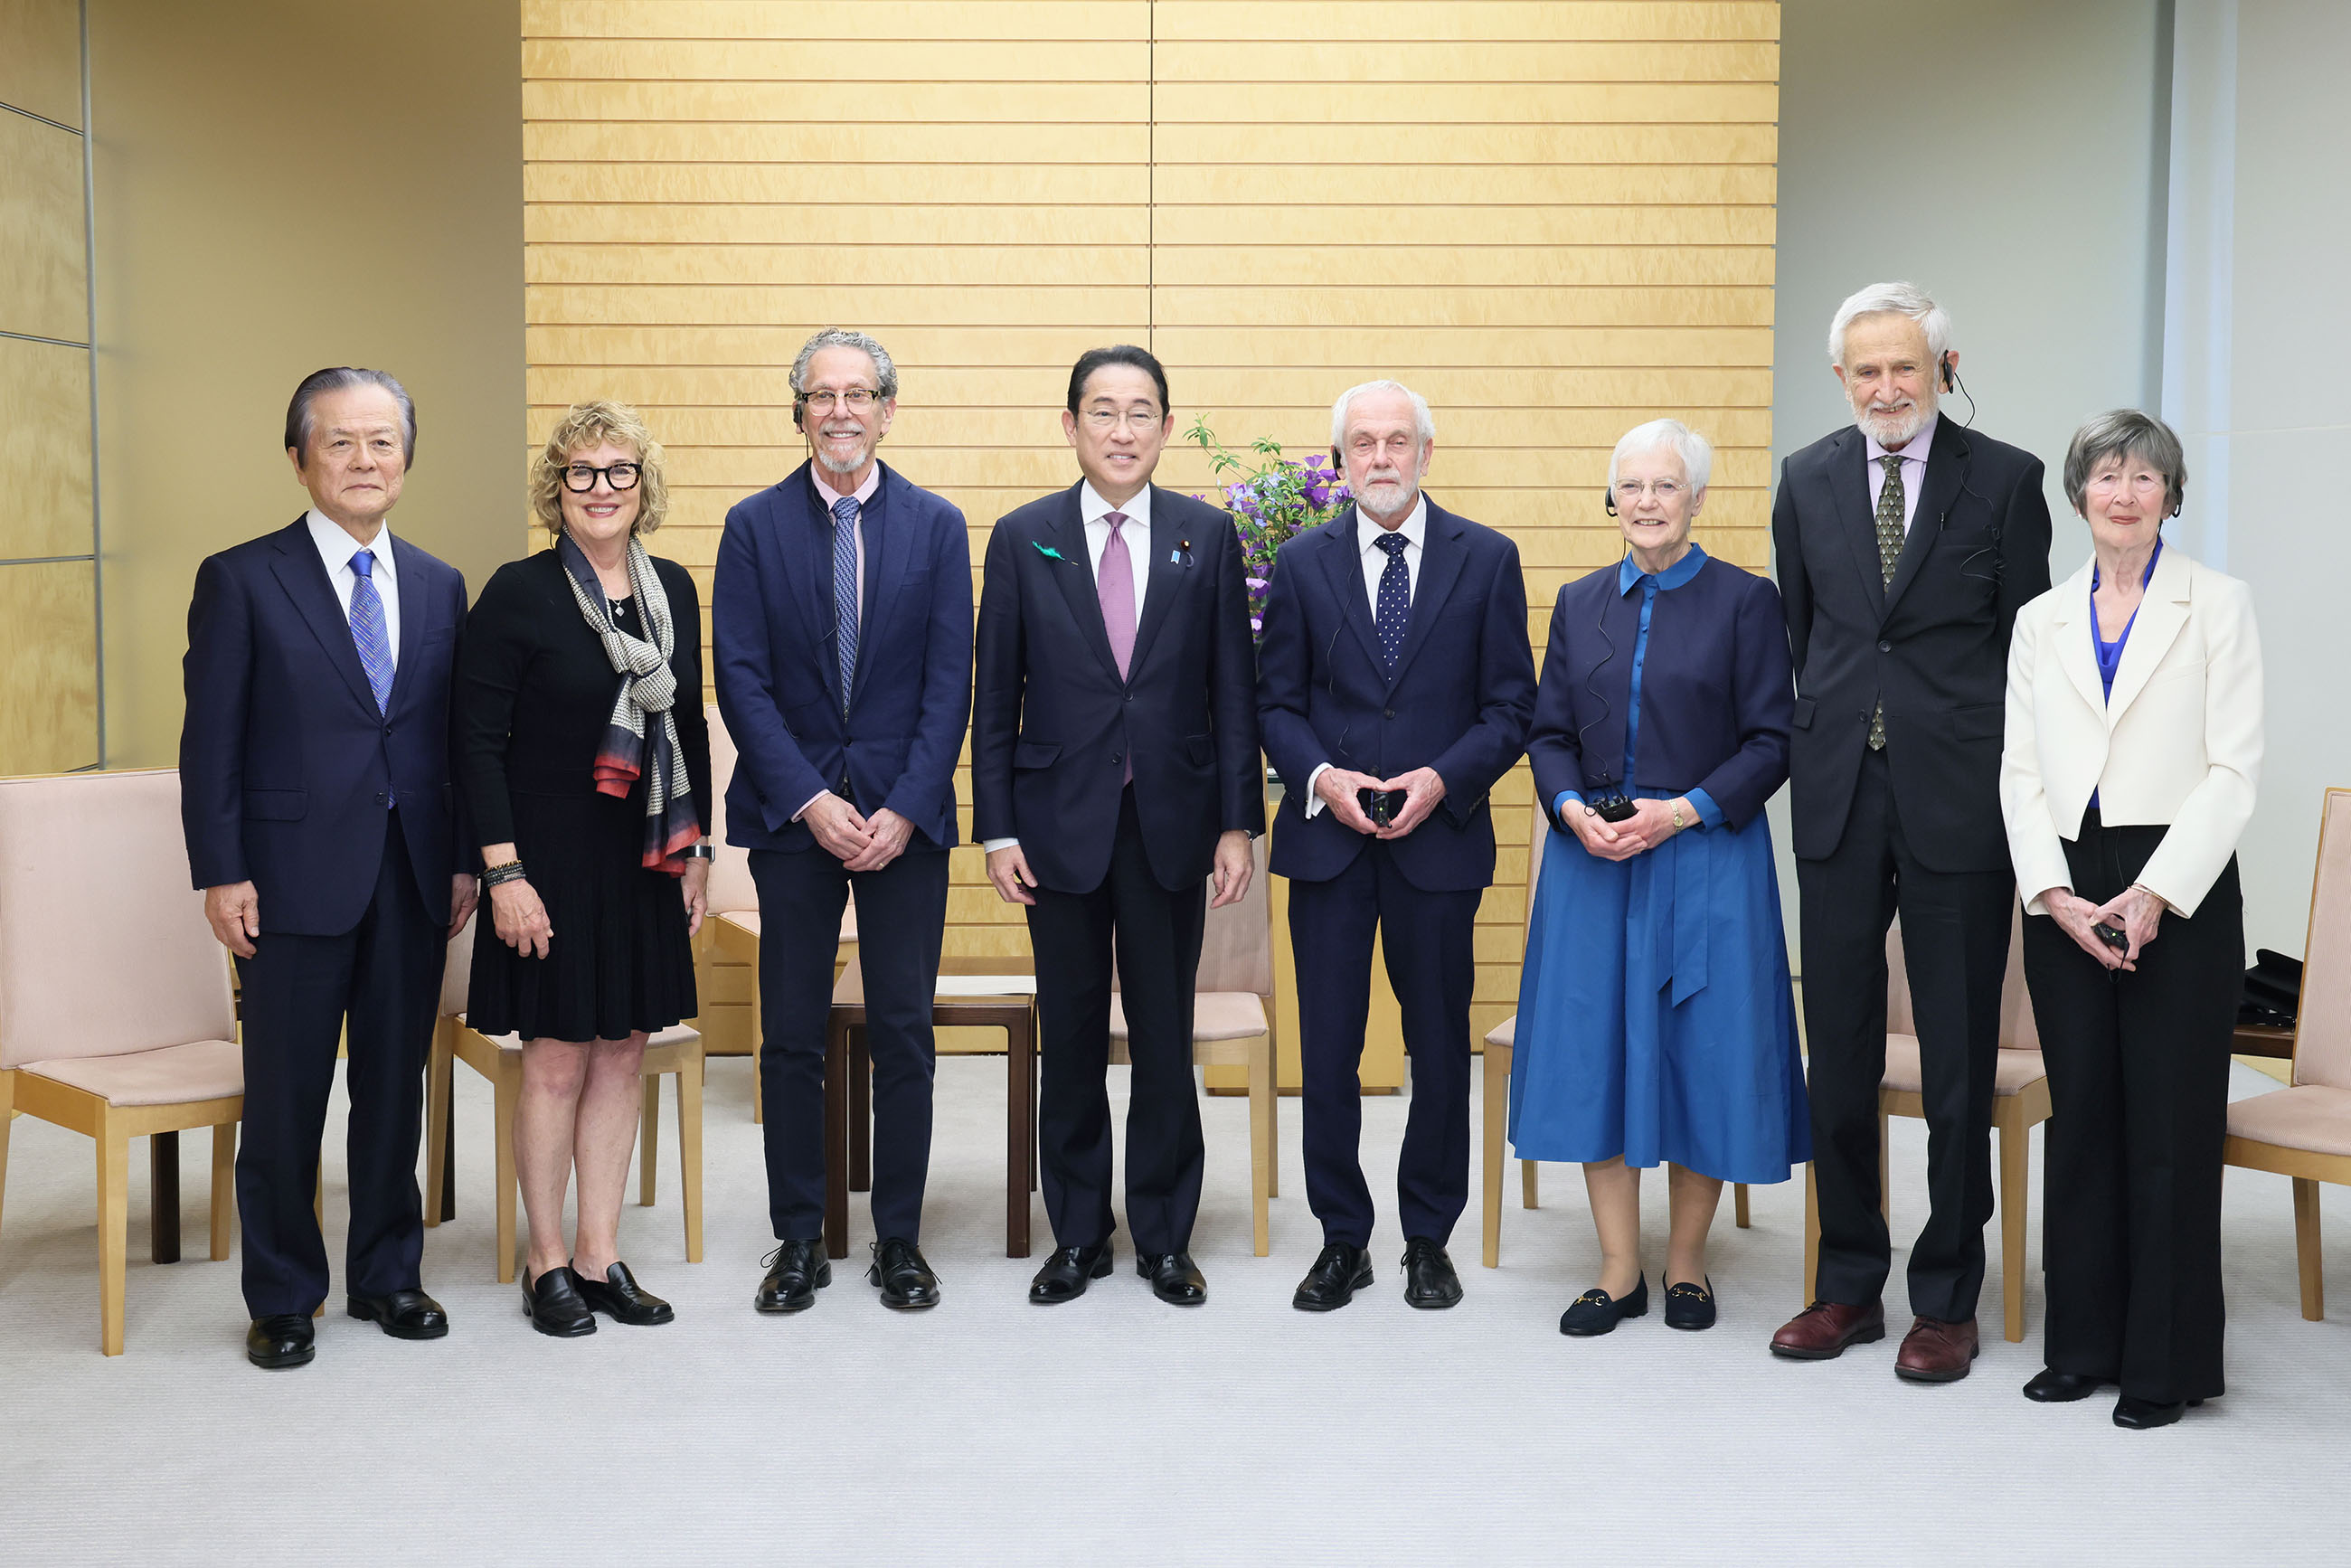 Courtesy Call from the Laureates of the Japan Prize